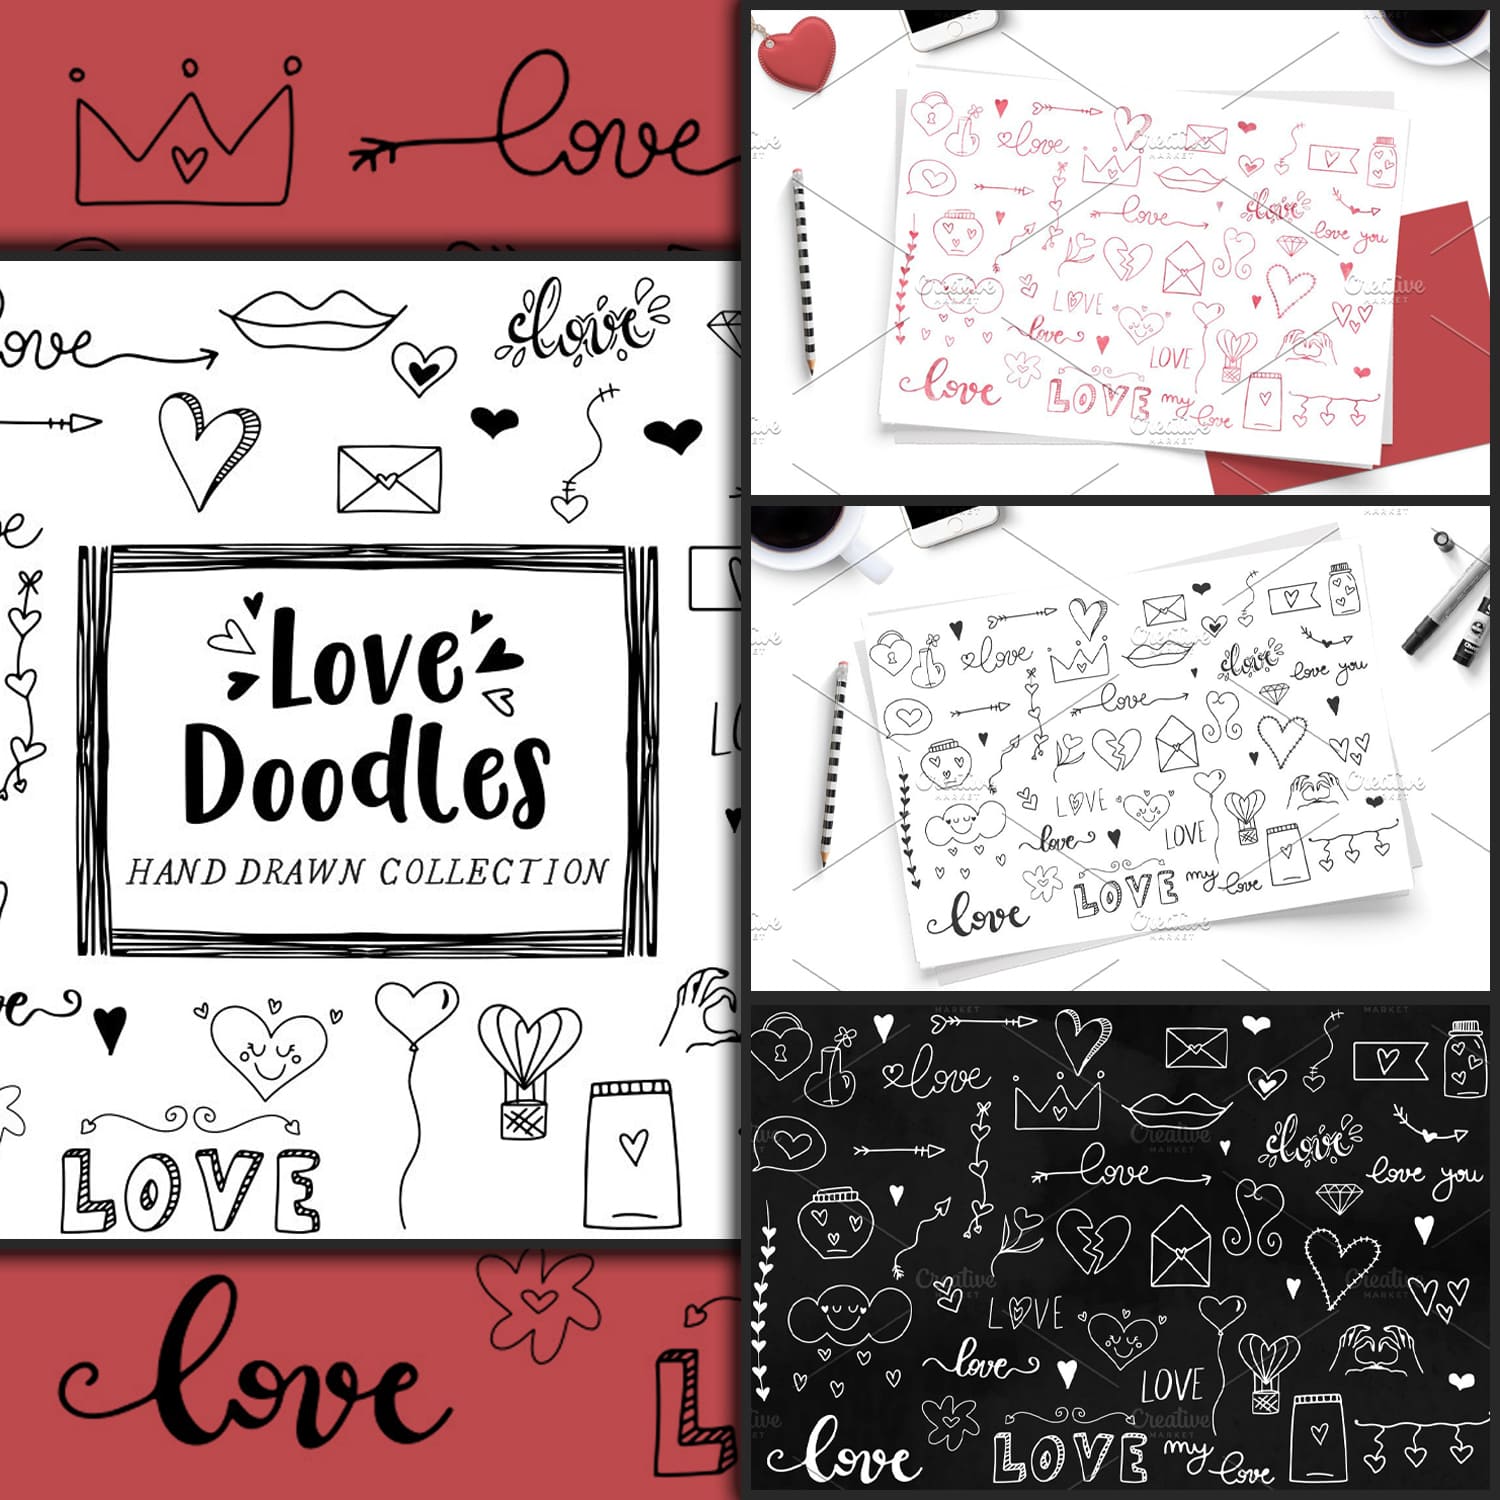 Artistic variations of love doodles on different backgrounds.